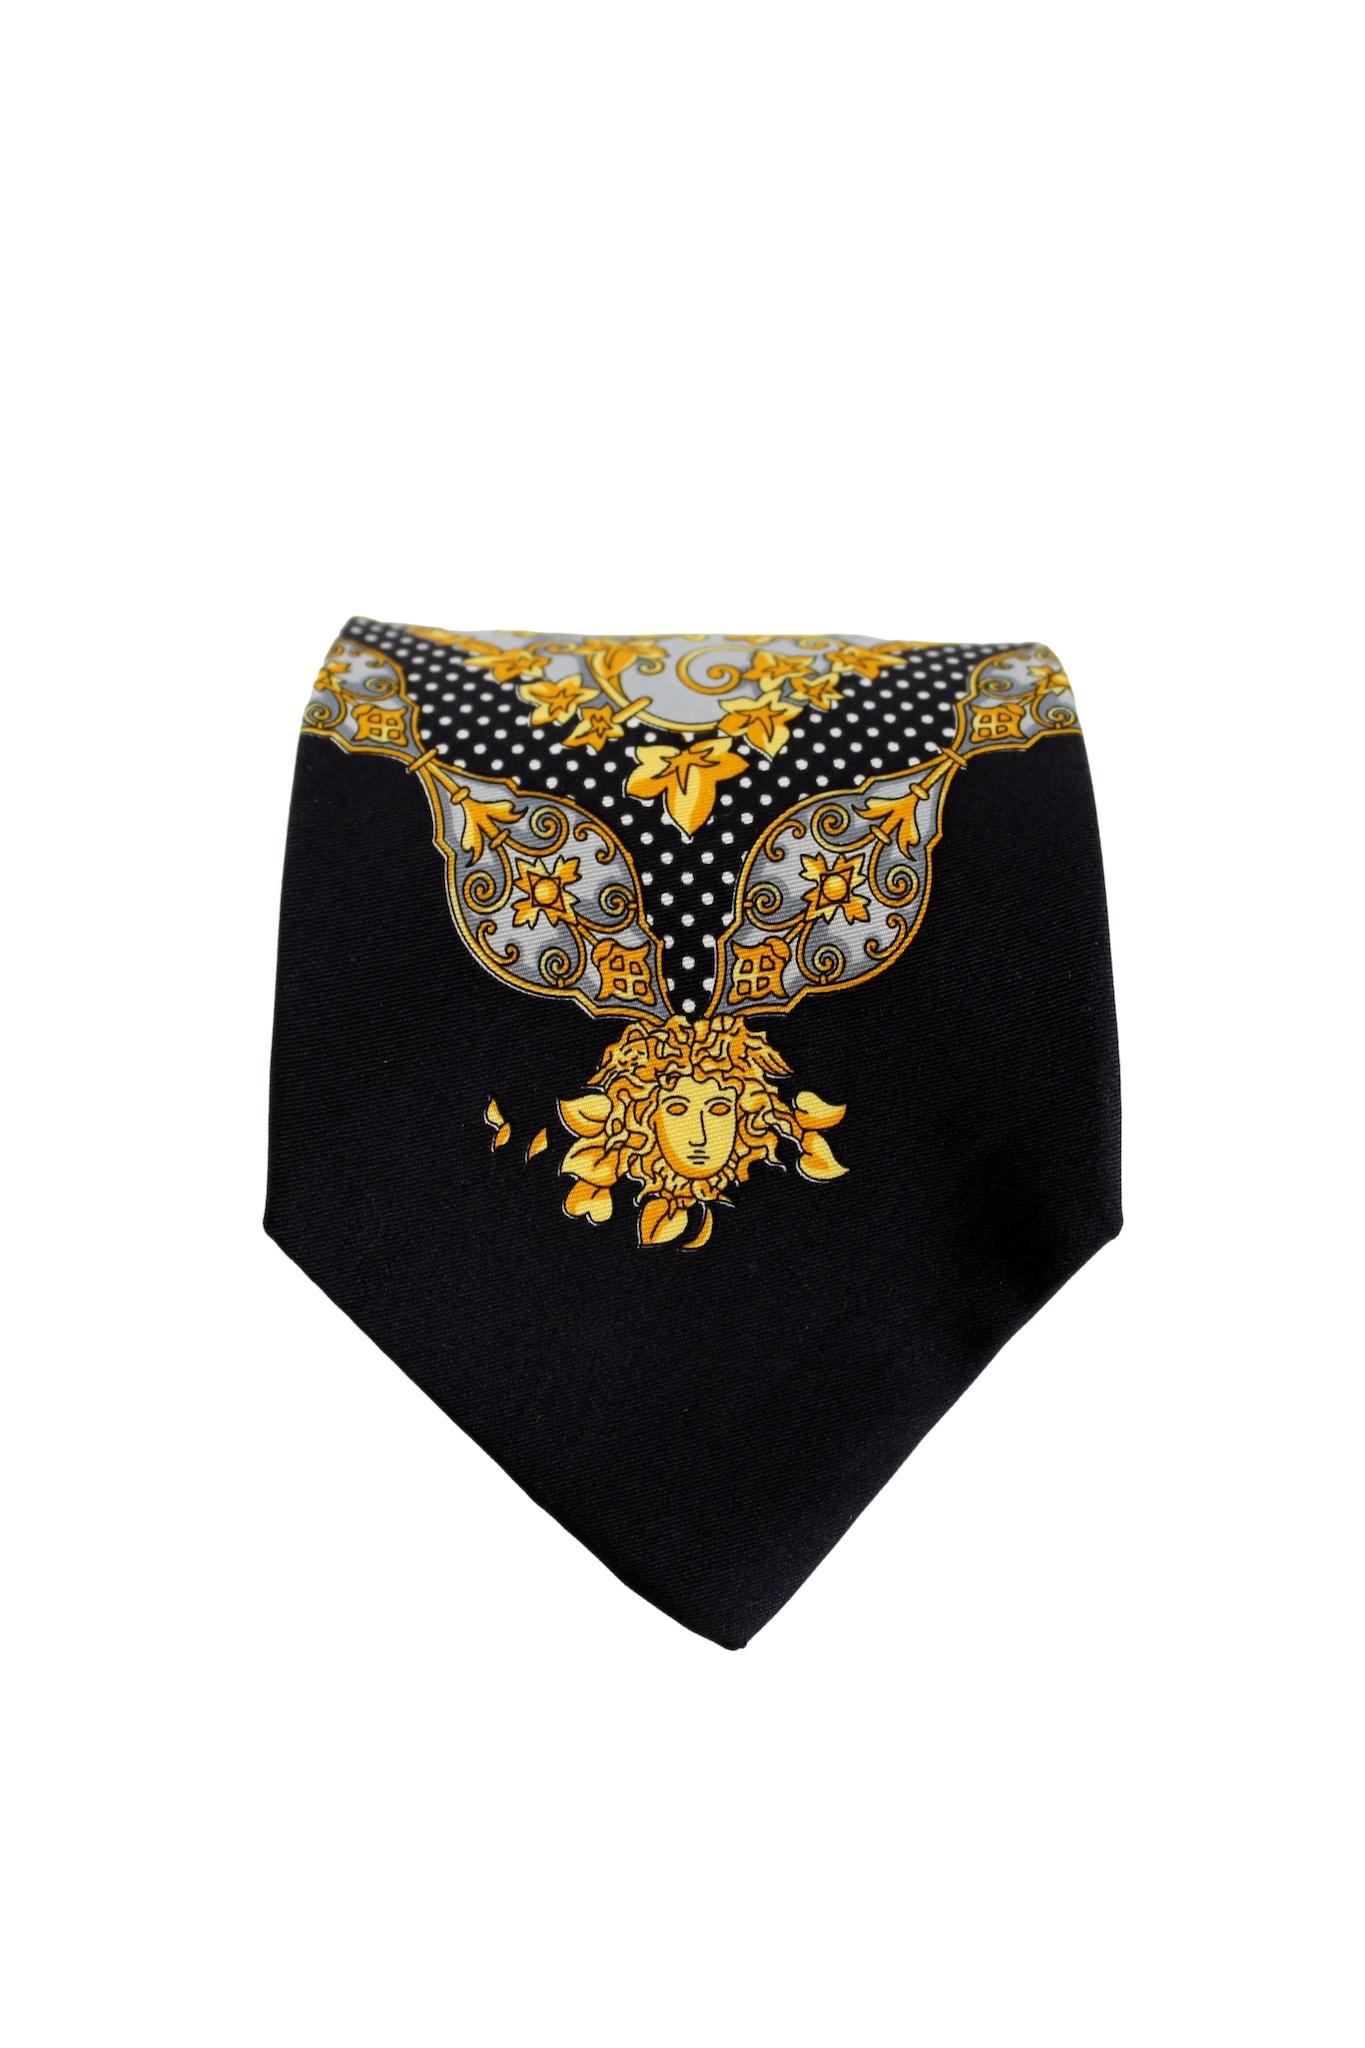 Gianni Versace vintage 80s medusa baroque style silk tie. Black, gray and gold color with floral and polka dot designs. Made in Italy.

Length: 150 cm
Width: 10 cm